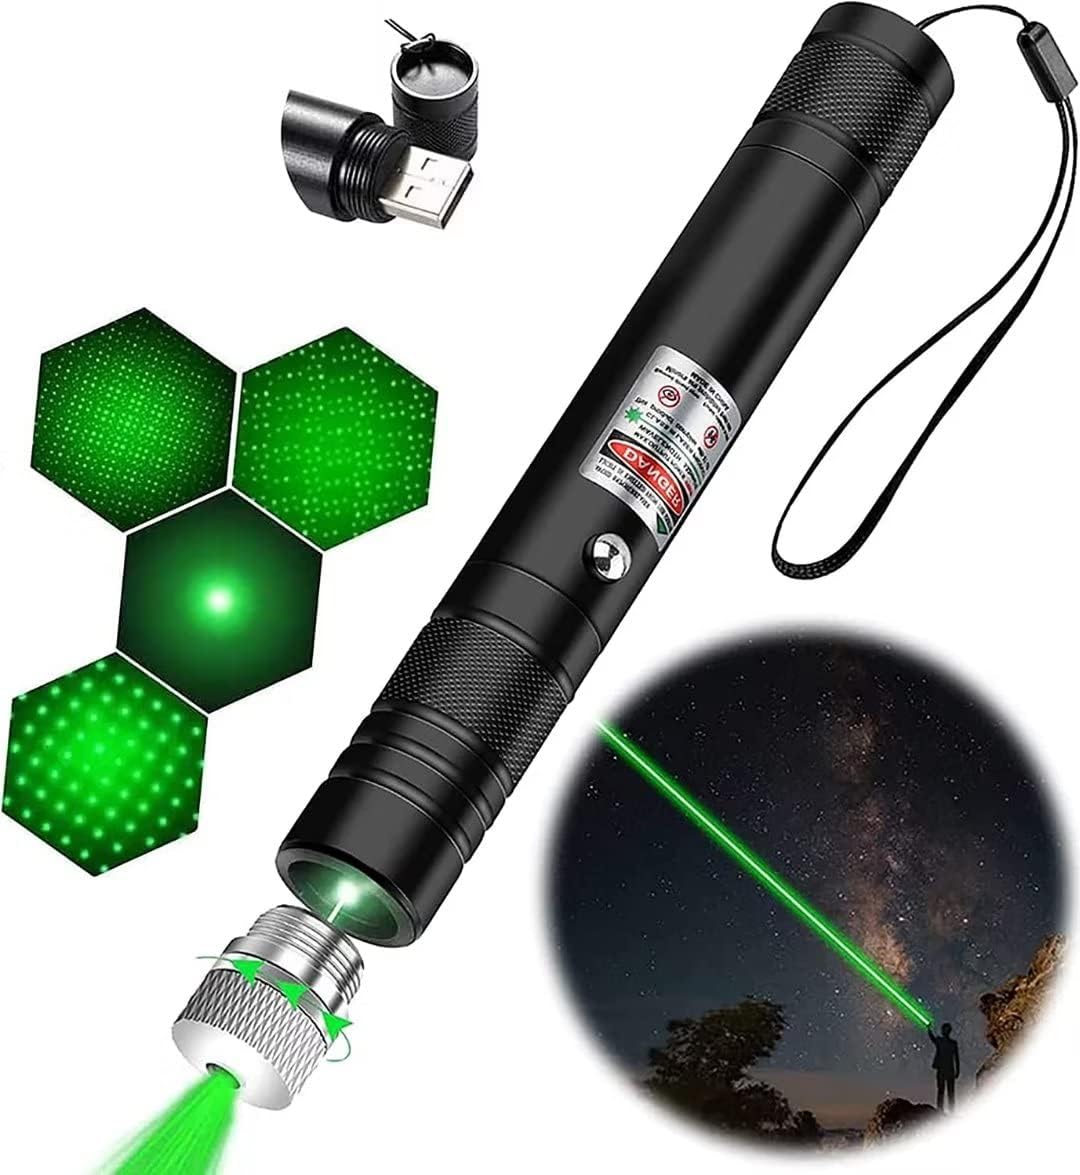 🔥Last Day Promotion 50% OFF🔥Military Grade 303 Laser Pointer